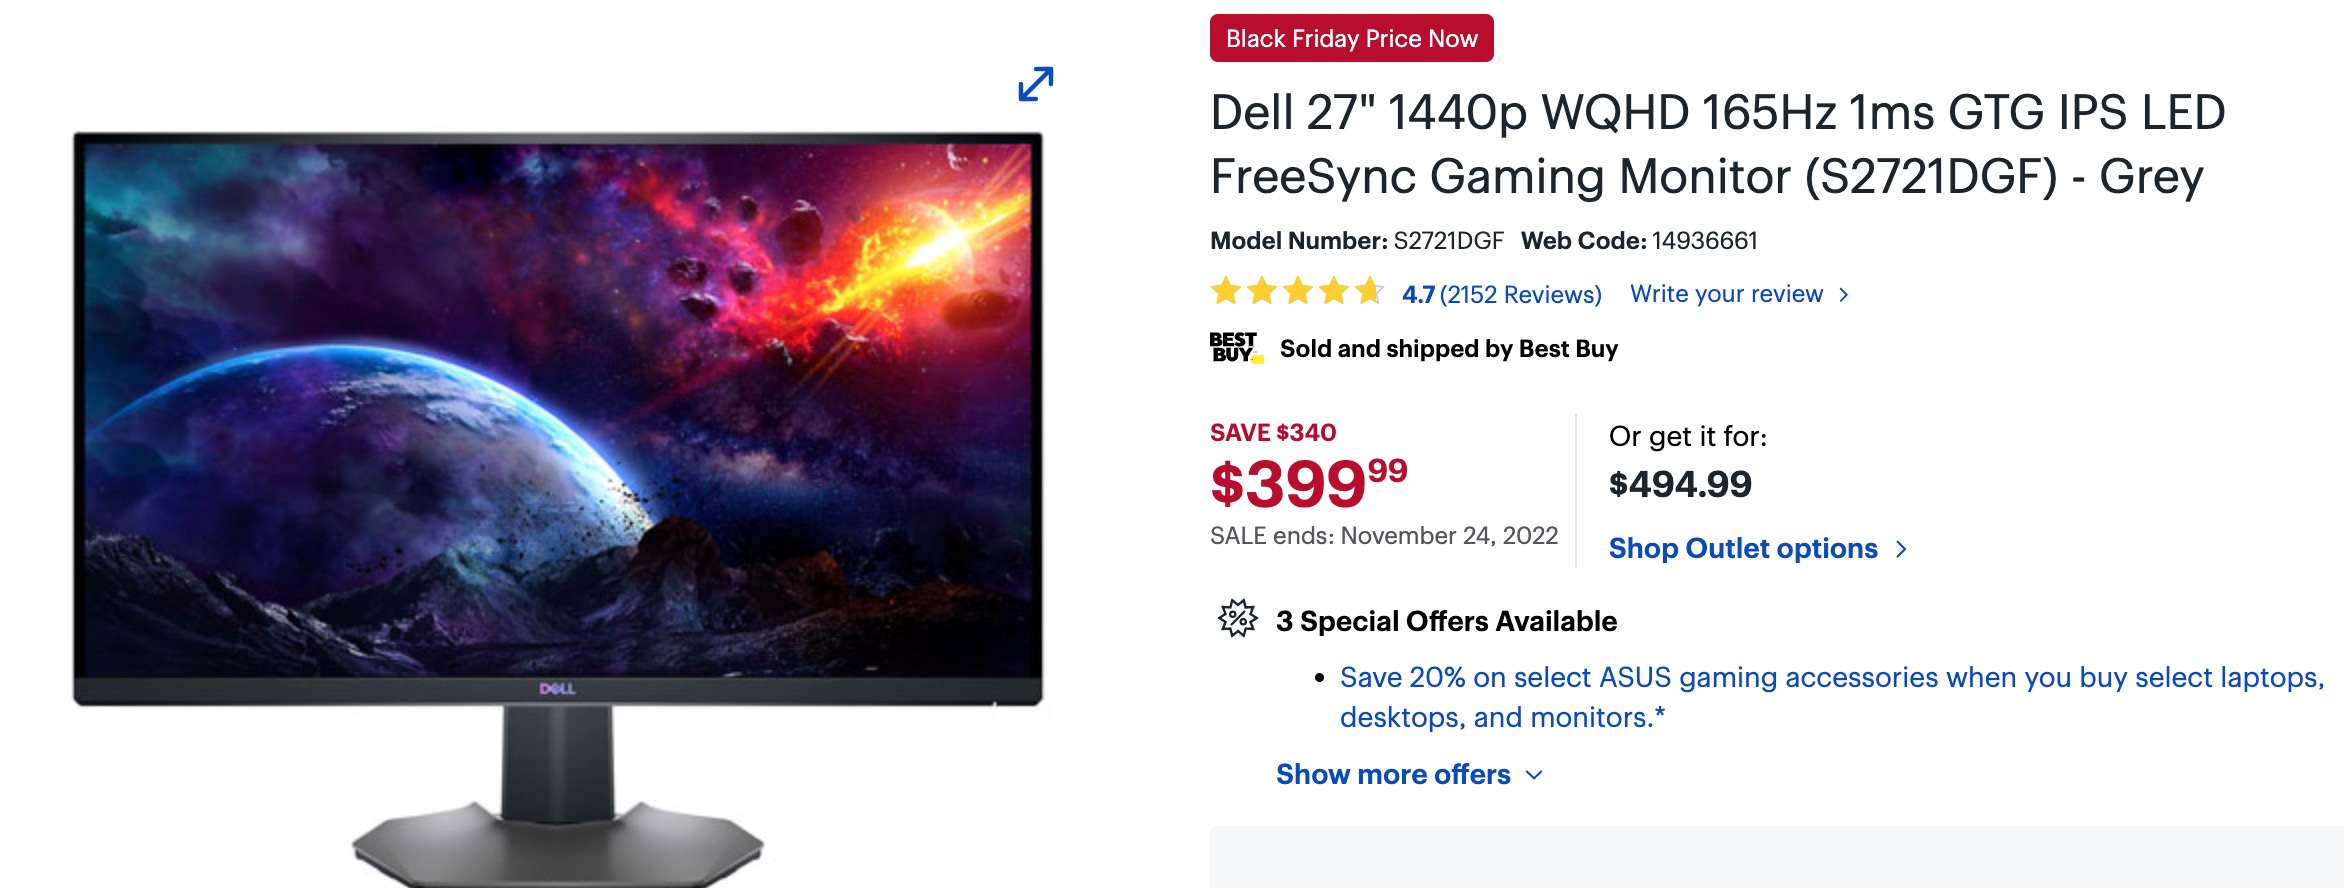 Dell 27 Gaming Monitor at Best Buy Canada or : $ *HOT * -  Canadian Freebies, Coupons, Deals, Bargains, Flyers, Contests Canada  Canadian Freebies, Coupons, Deals, Bargains, Flyers, Contests Canada